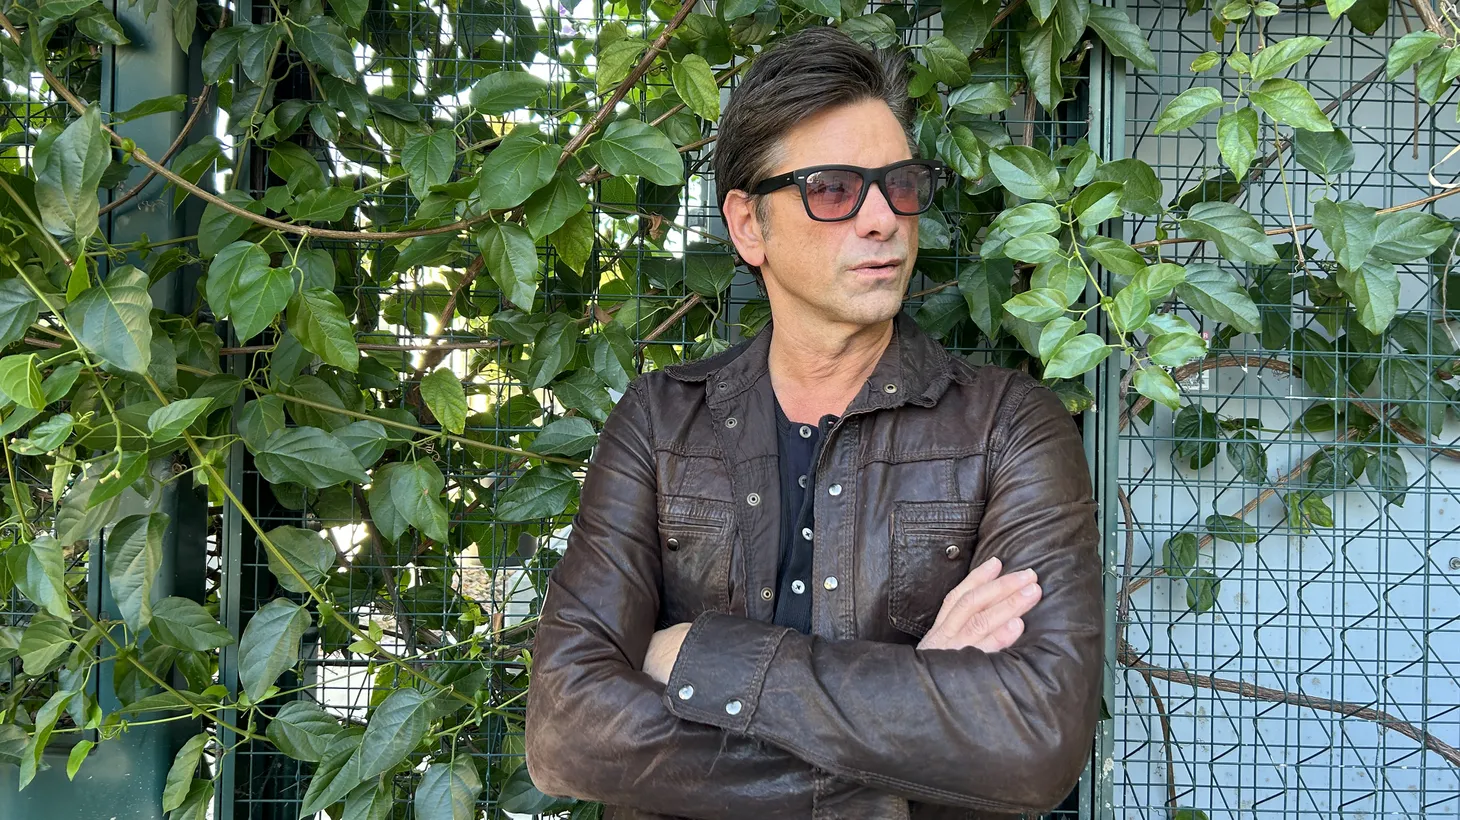 “This is me, my writing my heart,” says John Stamos of his new memoir, If You Would Have Told Me.